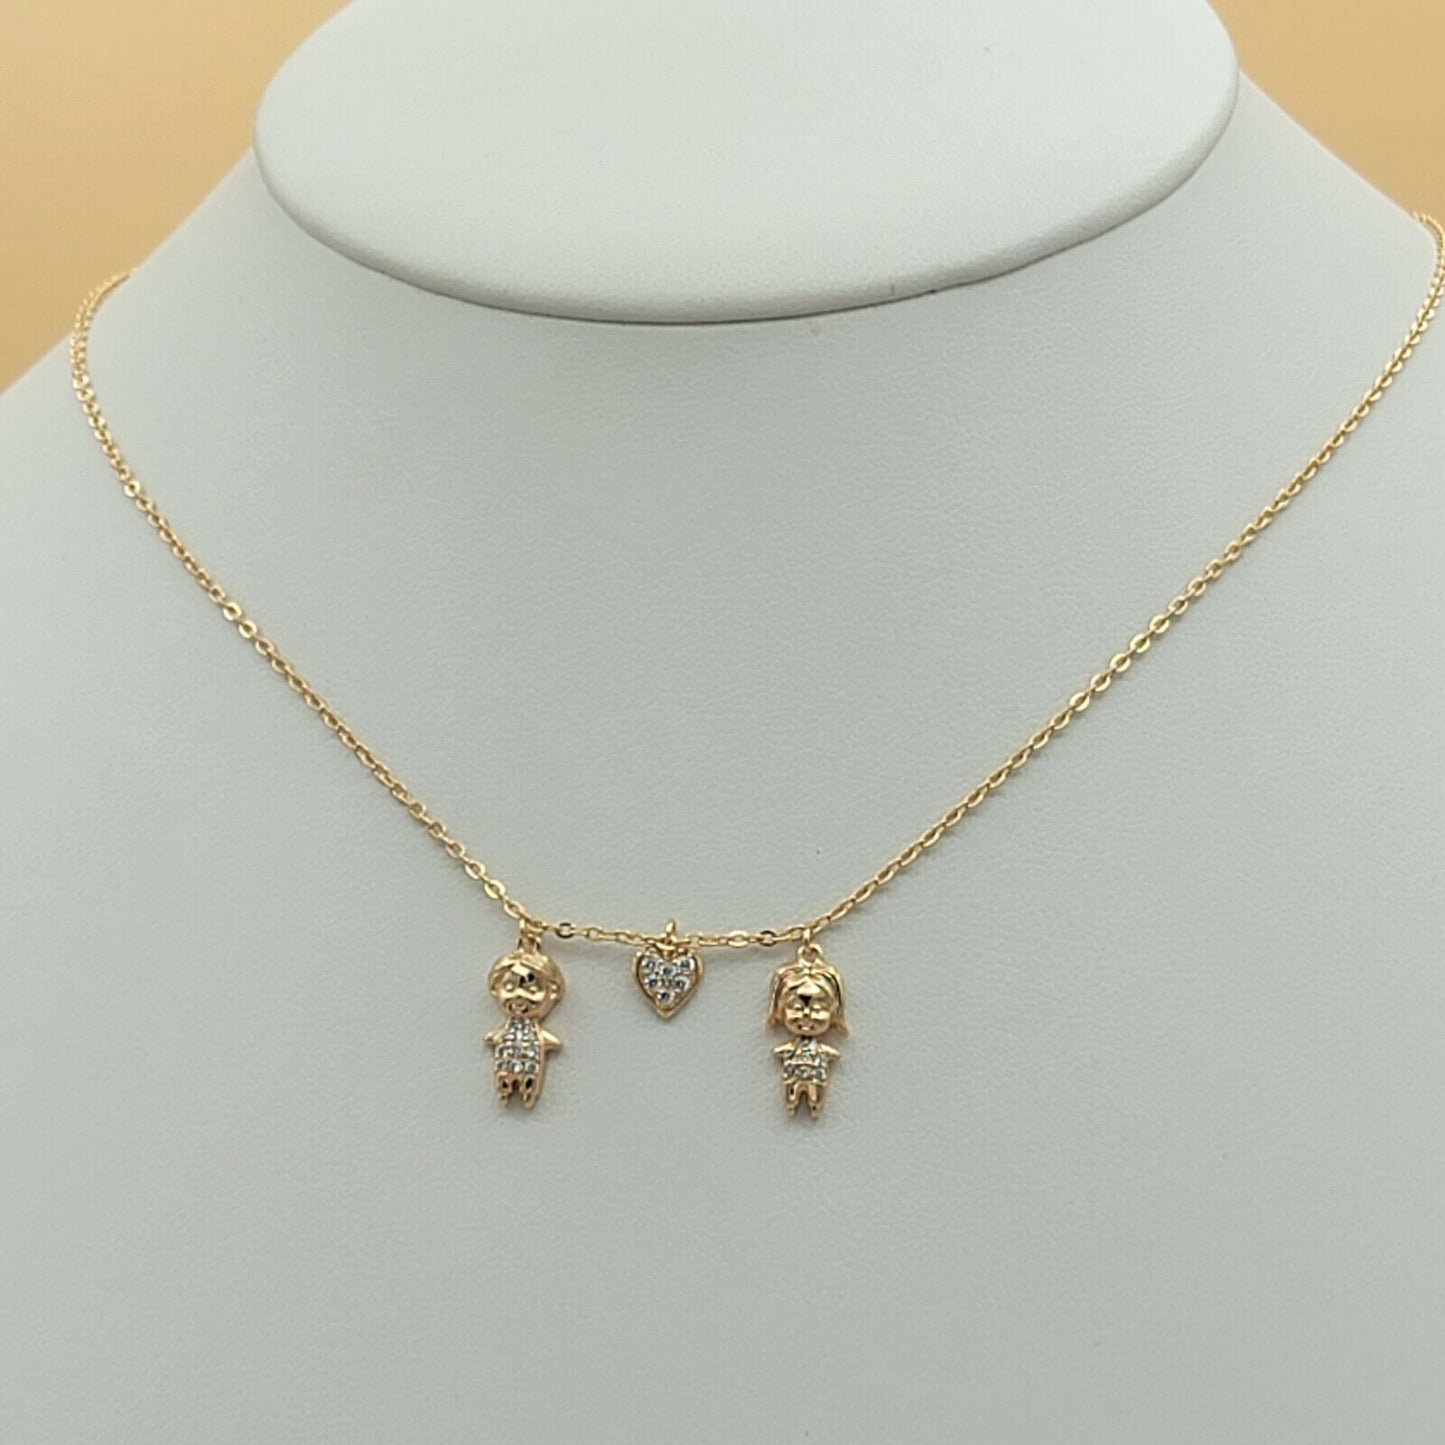 Necklaces - 18K Gold Plated. Girl - Heart - Boy Pendant Charm. Family.